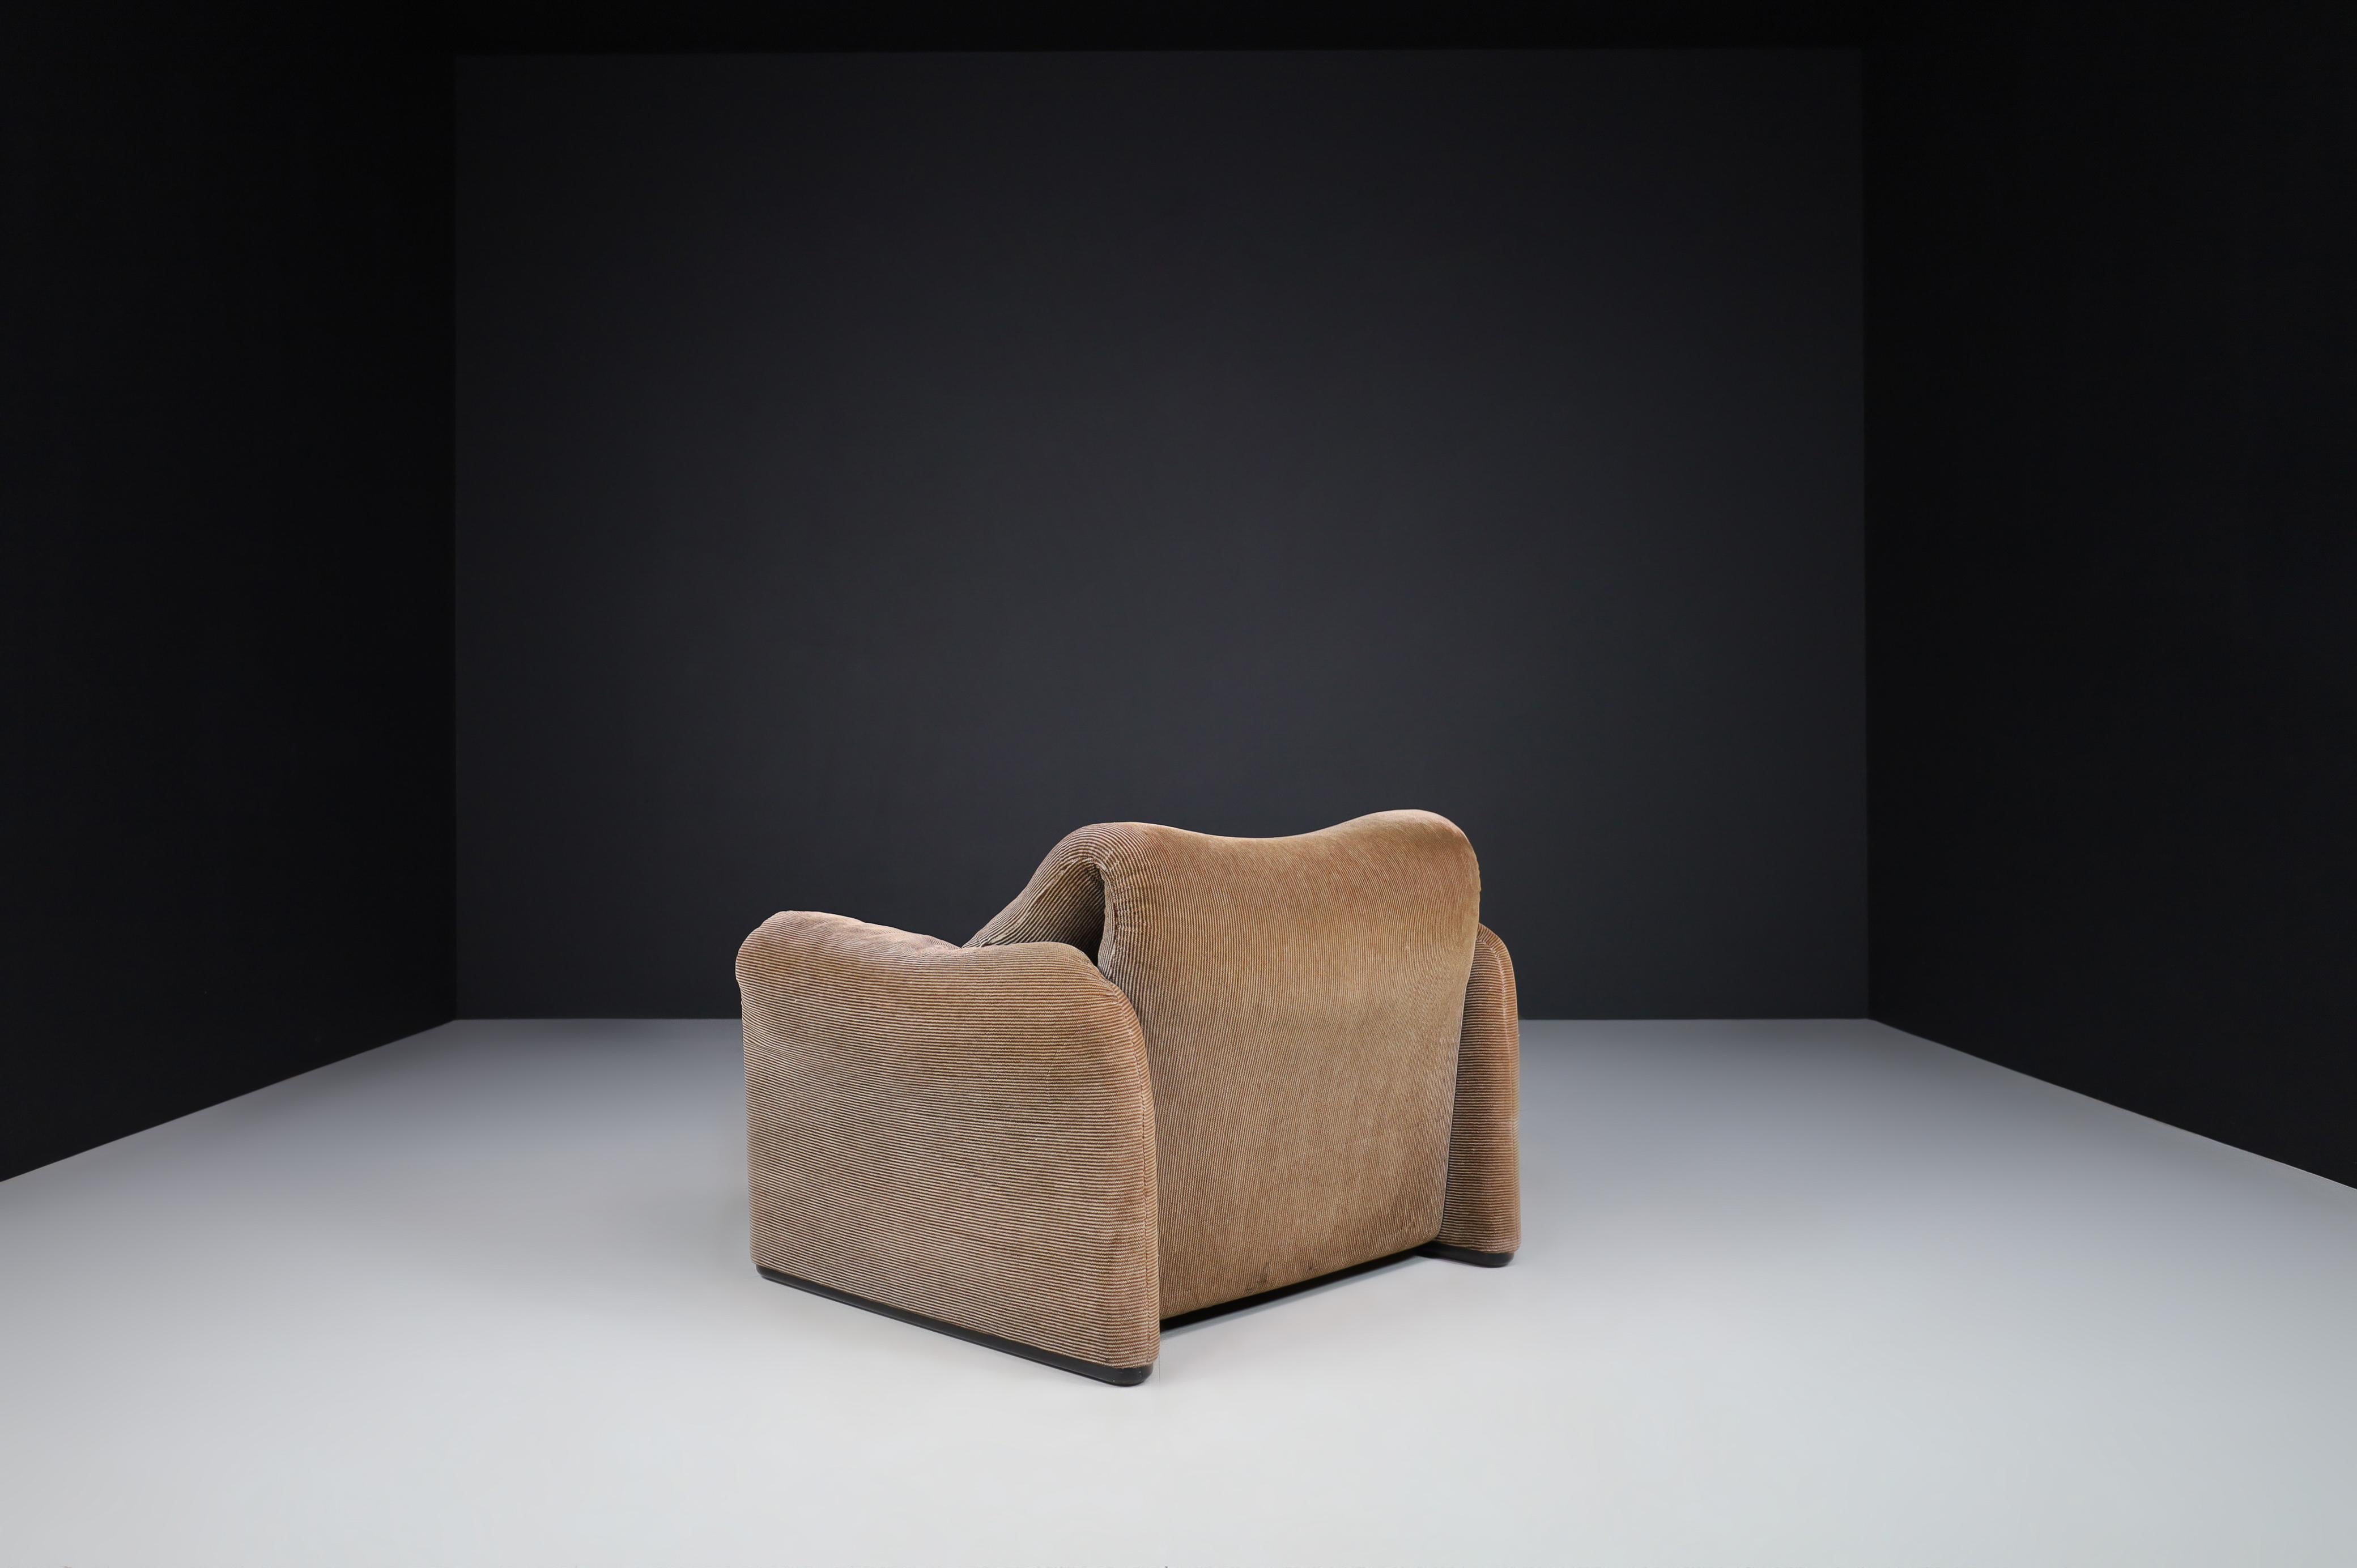 Steel Maralunga Lounge Chairs by Vico Magistretti for Cassina, 1970s